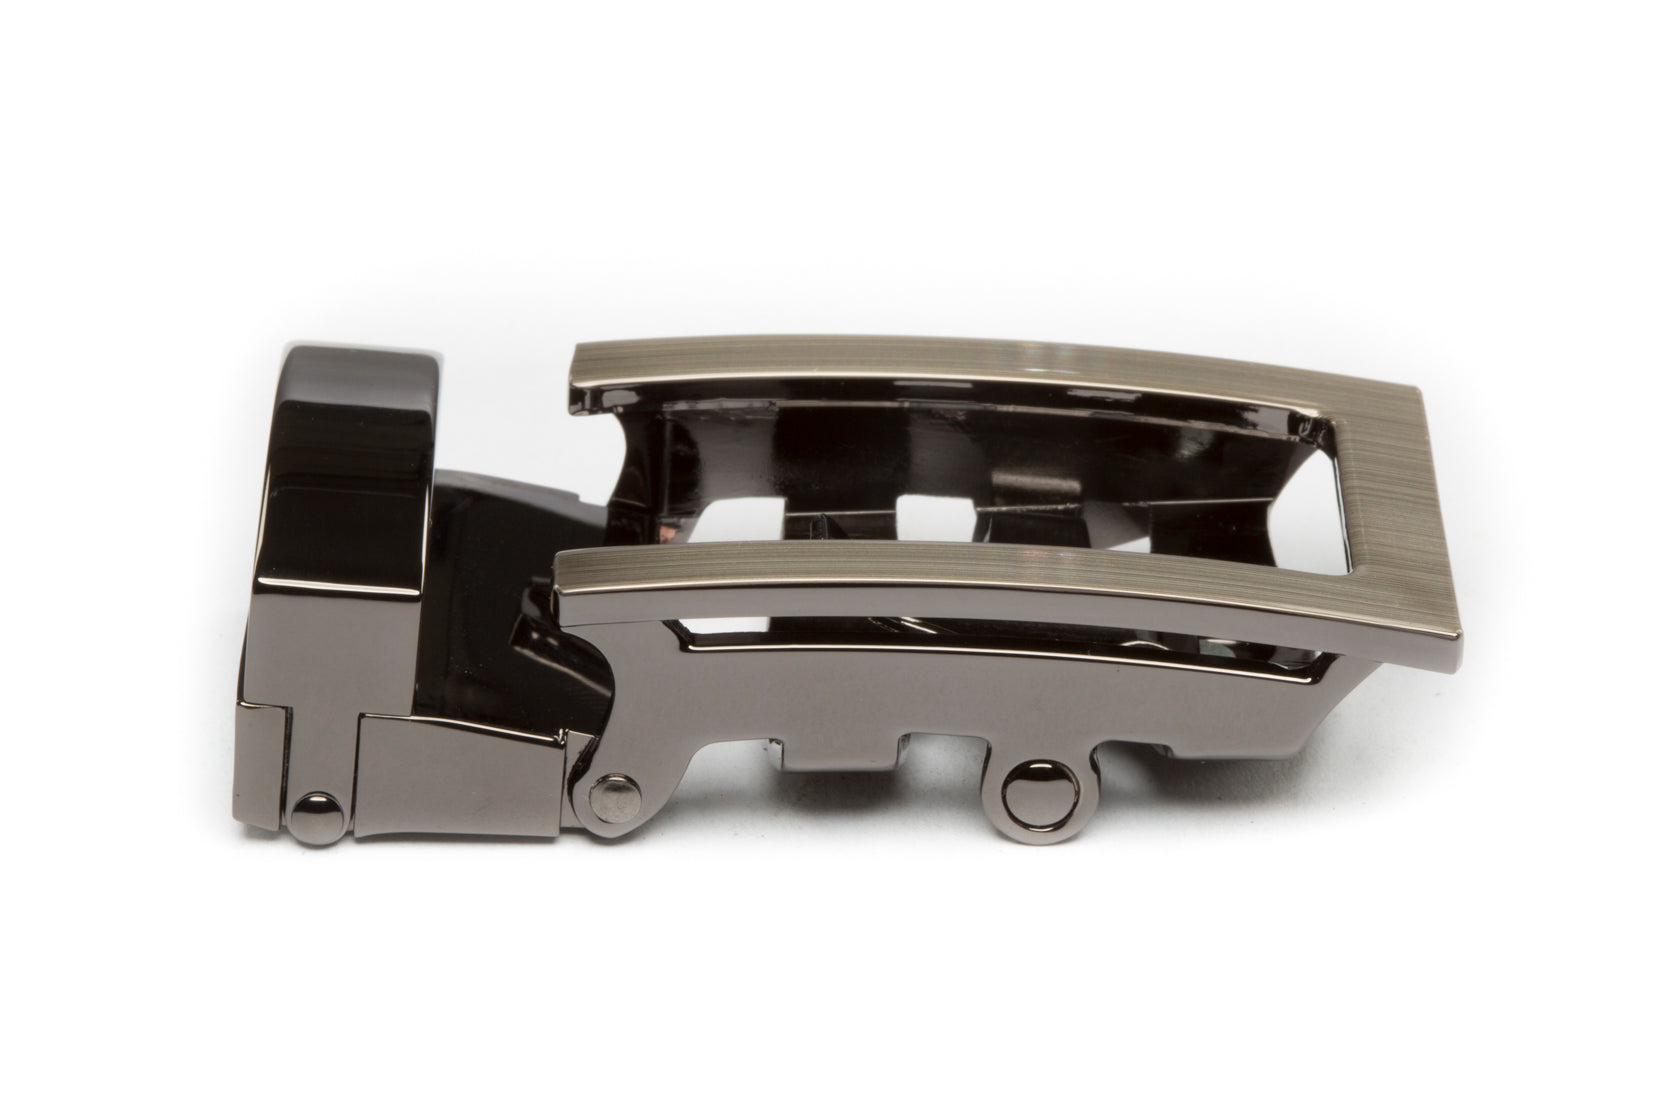 Men's traditional ratchet belt buckle in formal gunmetal with a 1.25-inch width, right side view.